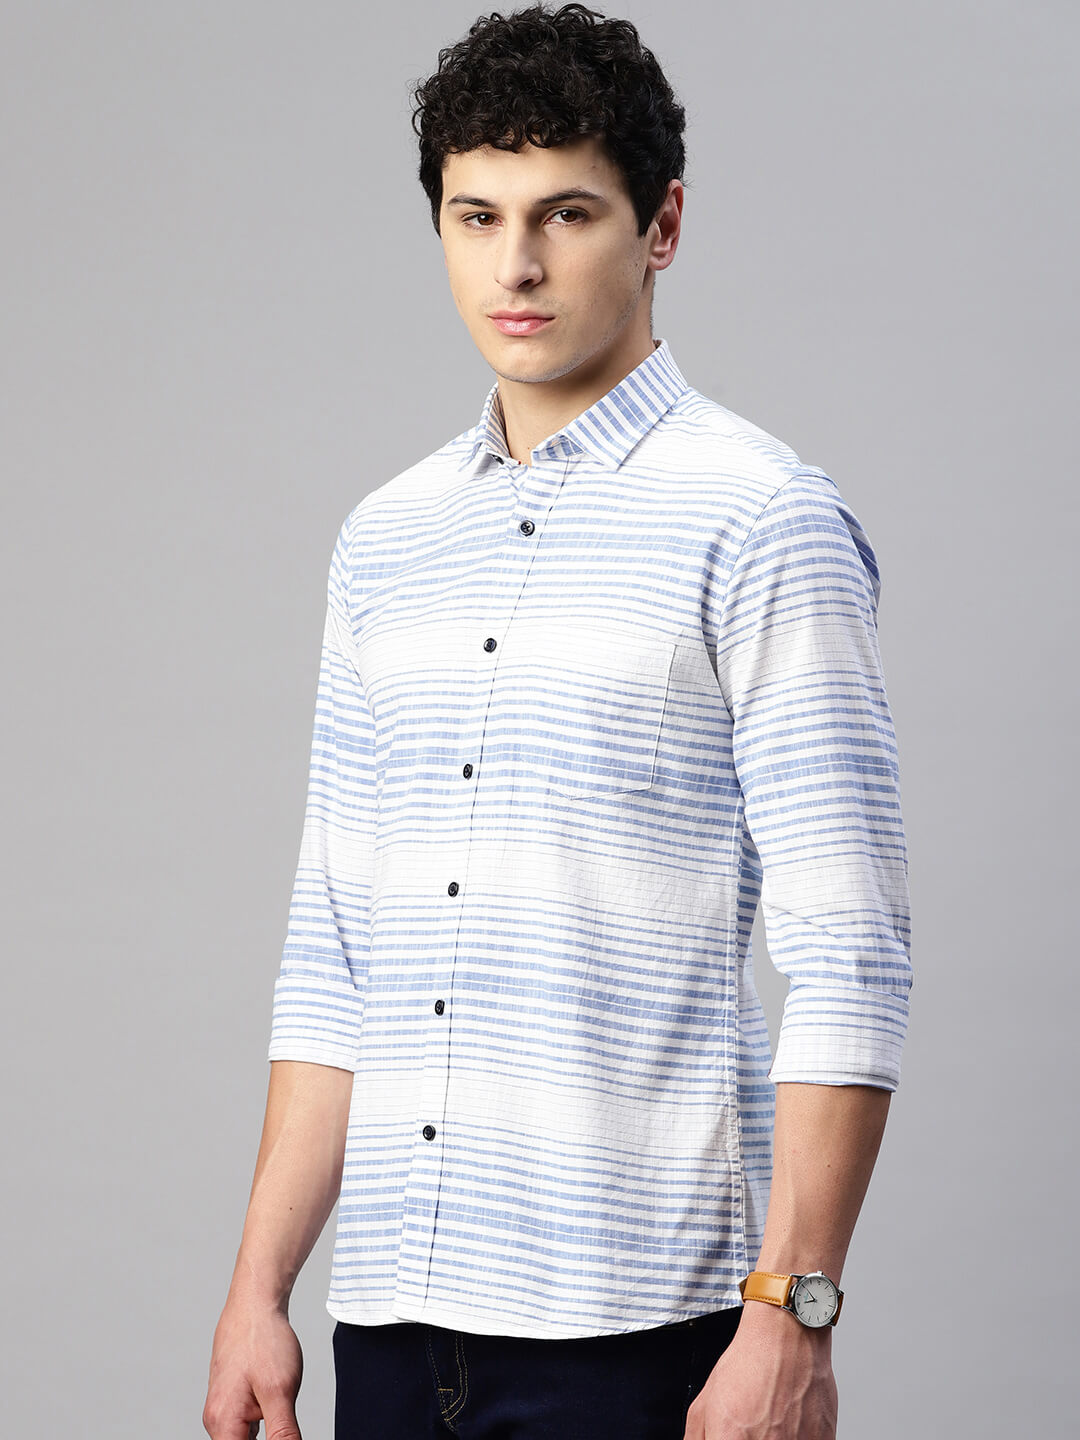 5thanfold Men's Pure Cotton Casual Full Sleeve Striped Blue Slim Fit Shirt